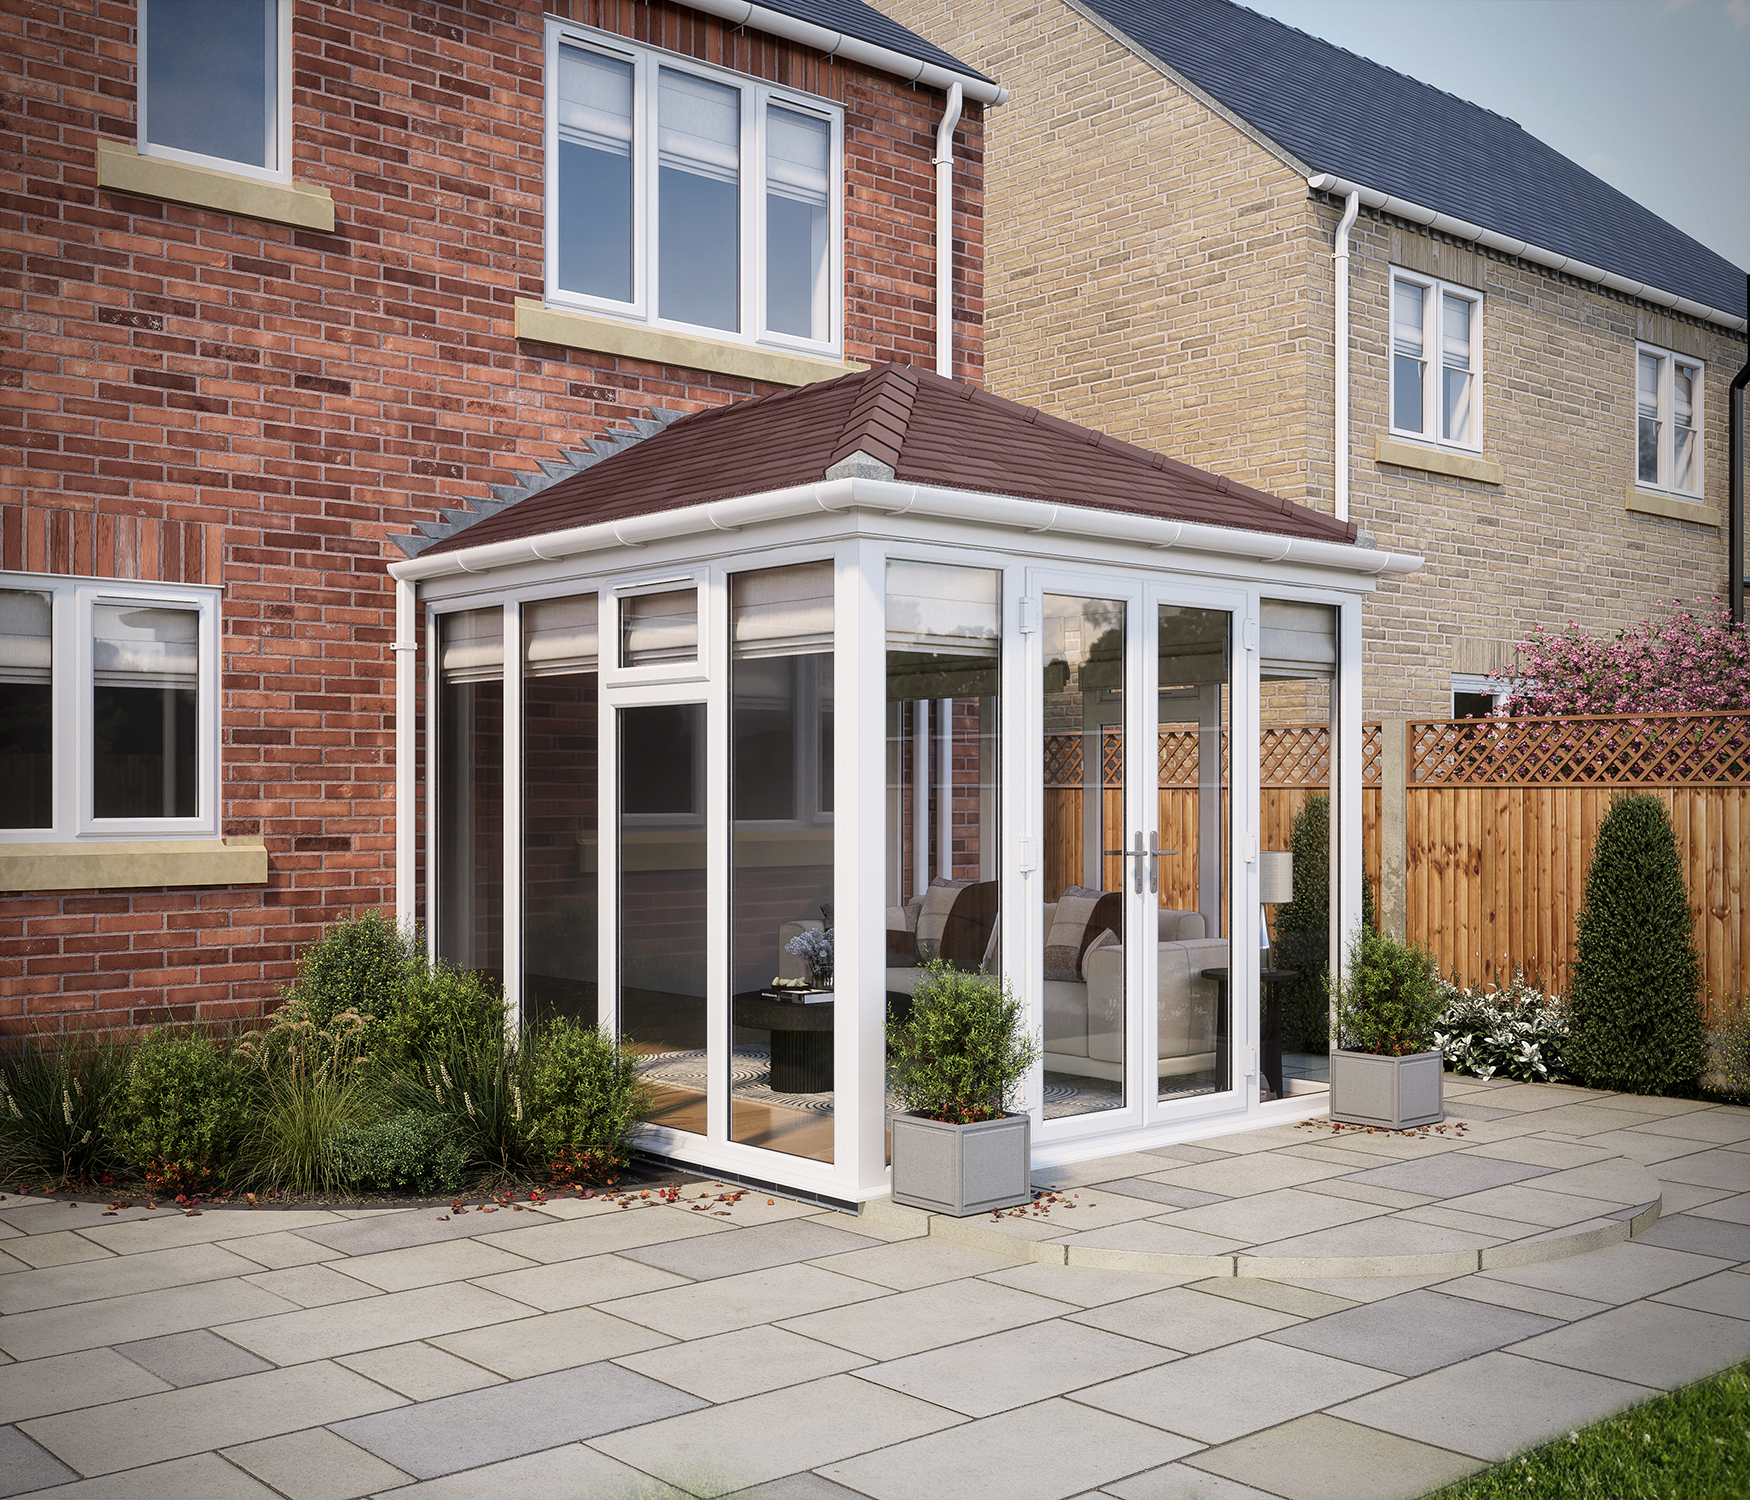 Image of SOLid Roof Full Height Edwardian Conservatory White Frames with Rustic Brown Tiles - 13 x 10ft